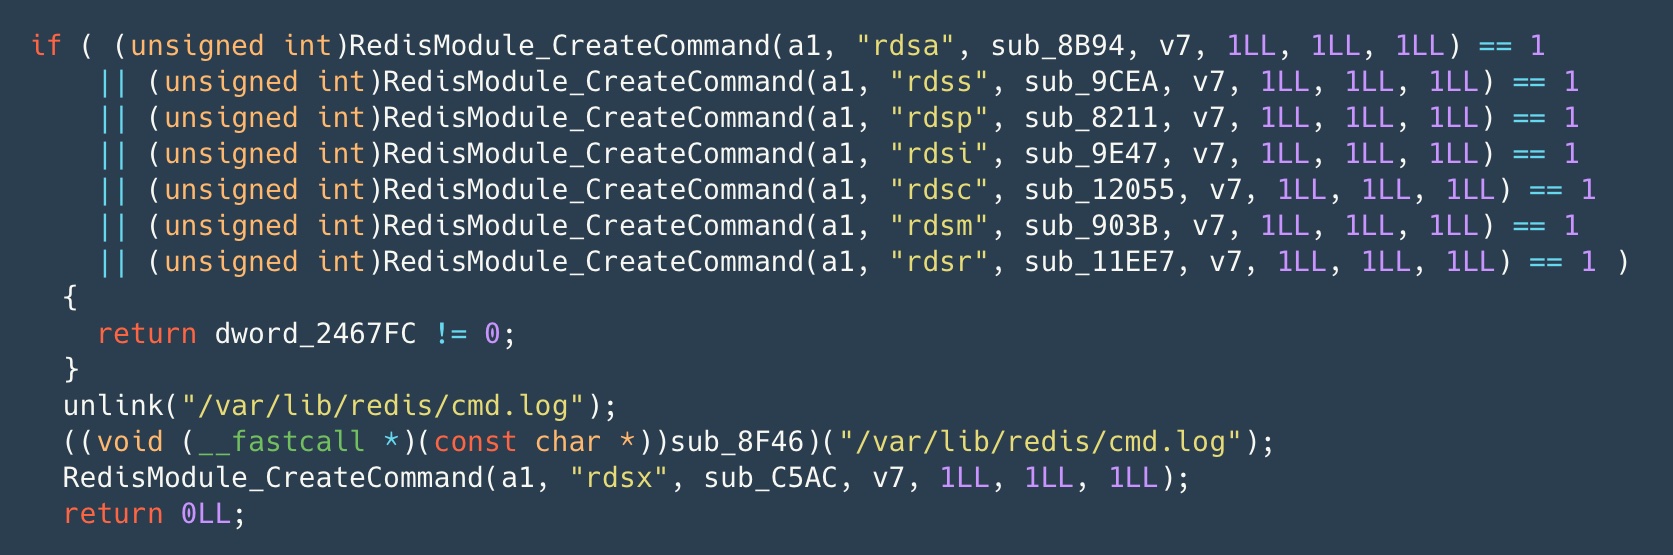 Simulation to some of these commands